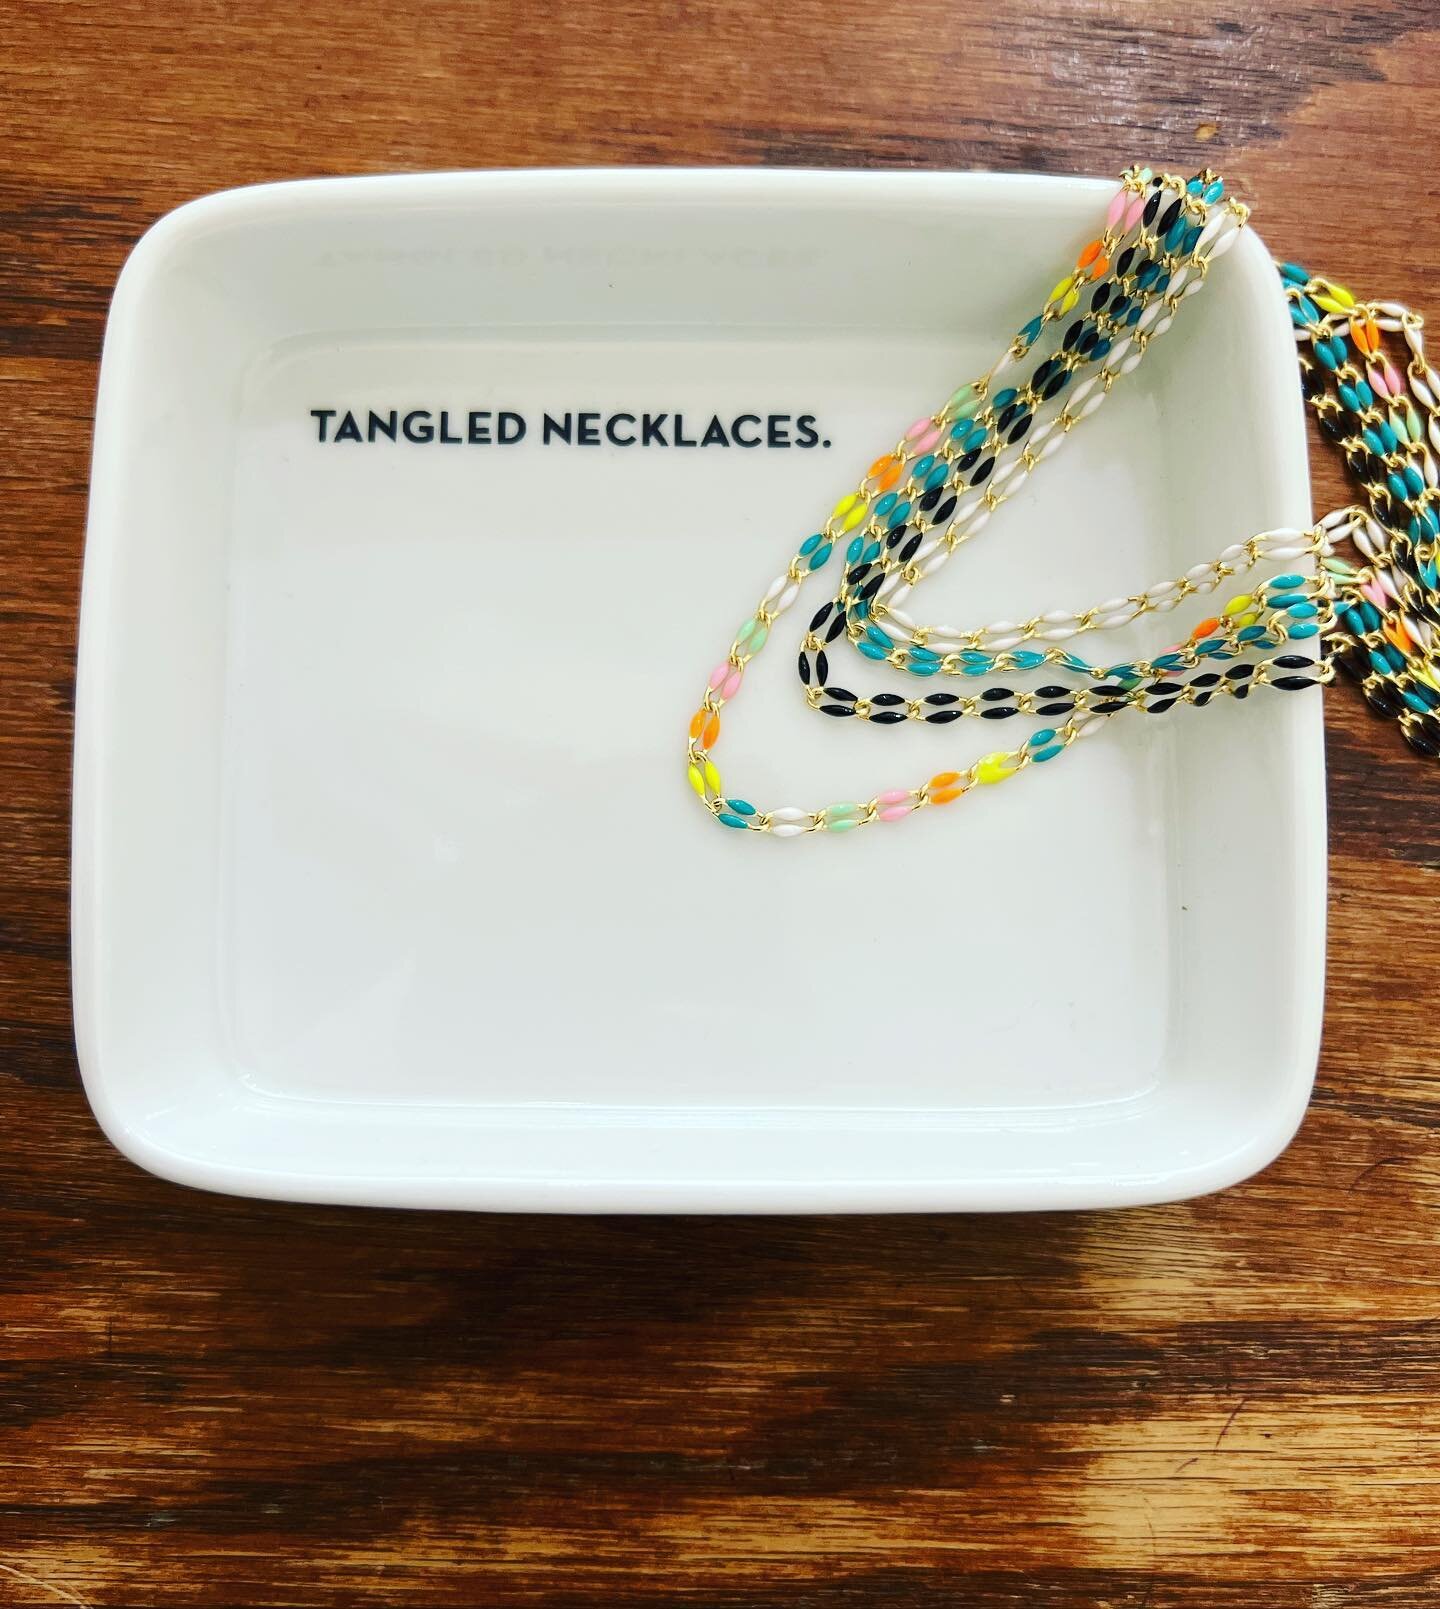 Cute gift idea 💡
Catch-all dish, $16
Necklaces, $32/each